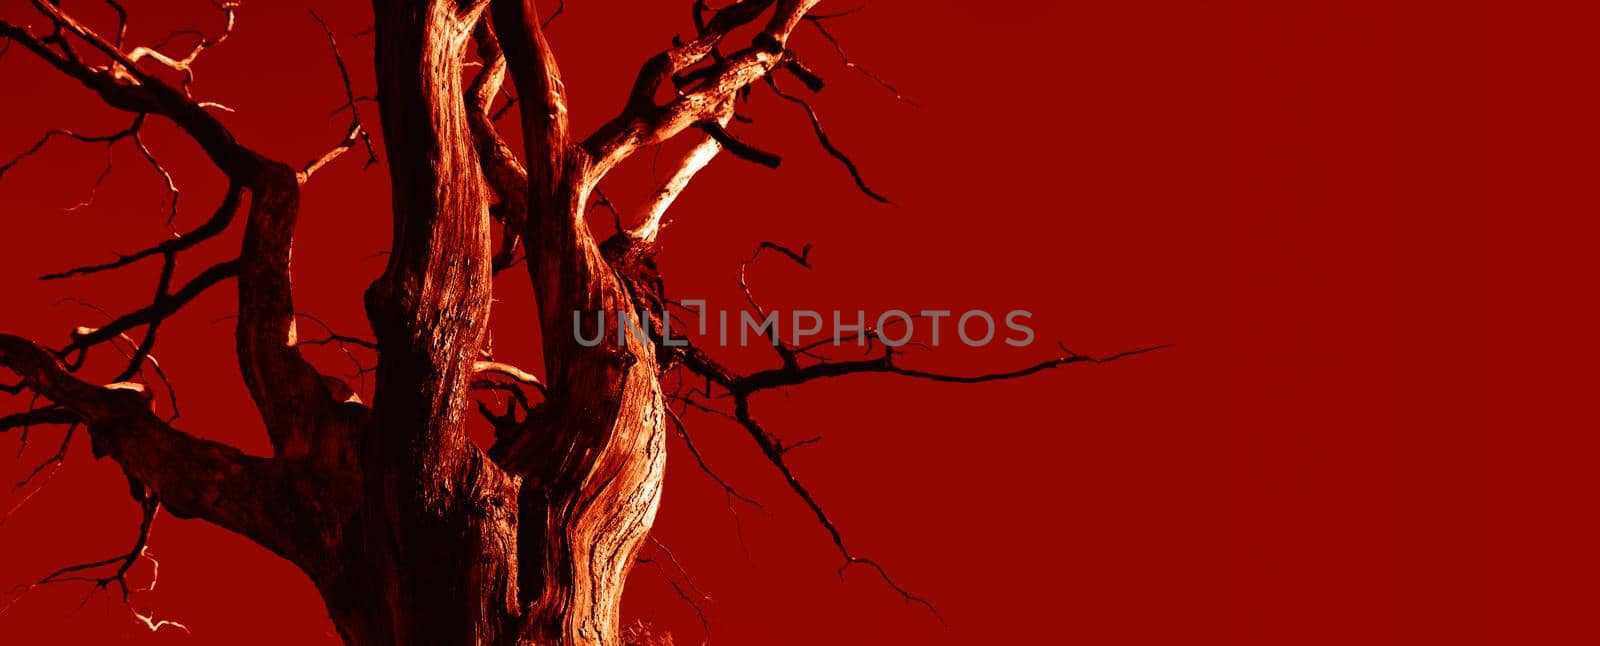 Hot day in hell. Dead branches of a tree. Old and completely dry tree against red sky. Dead Tree without leaf.